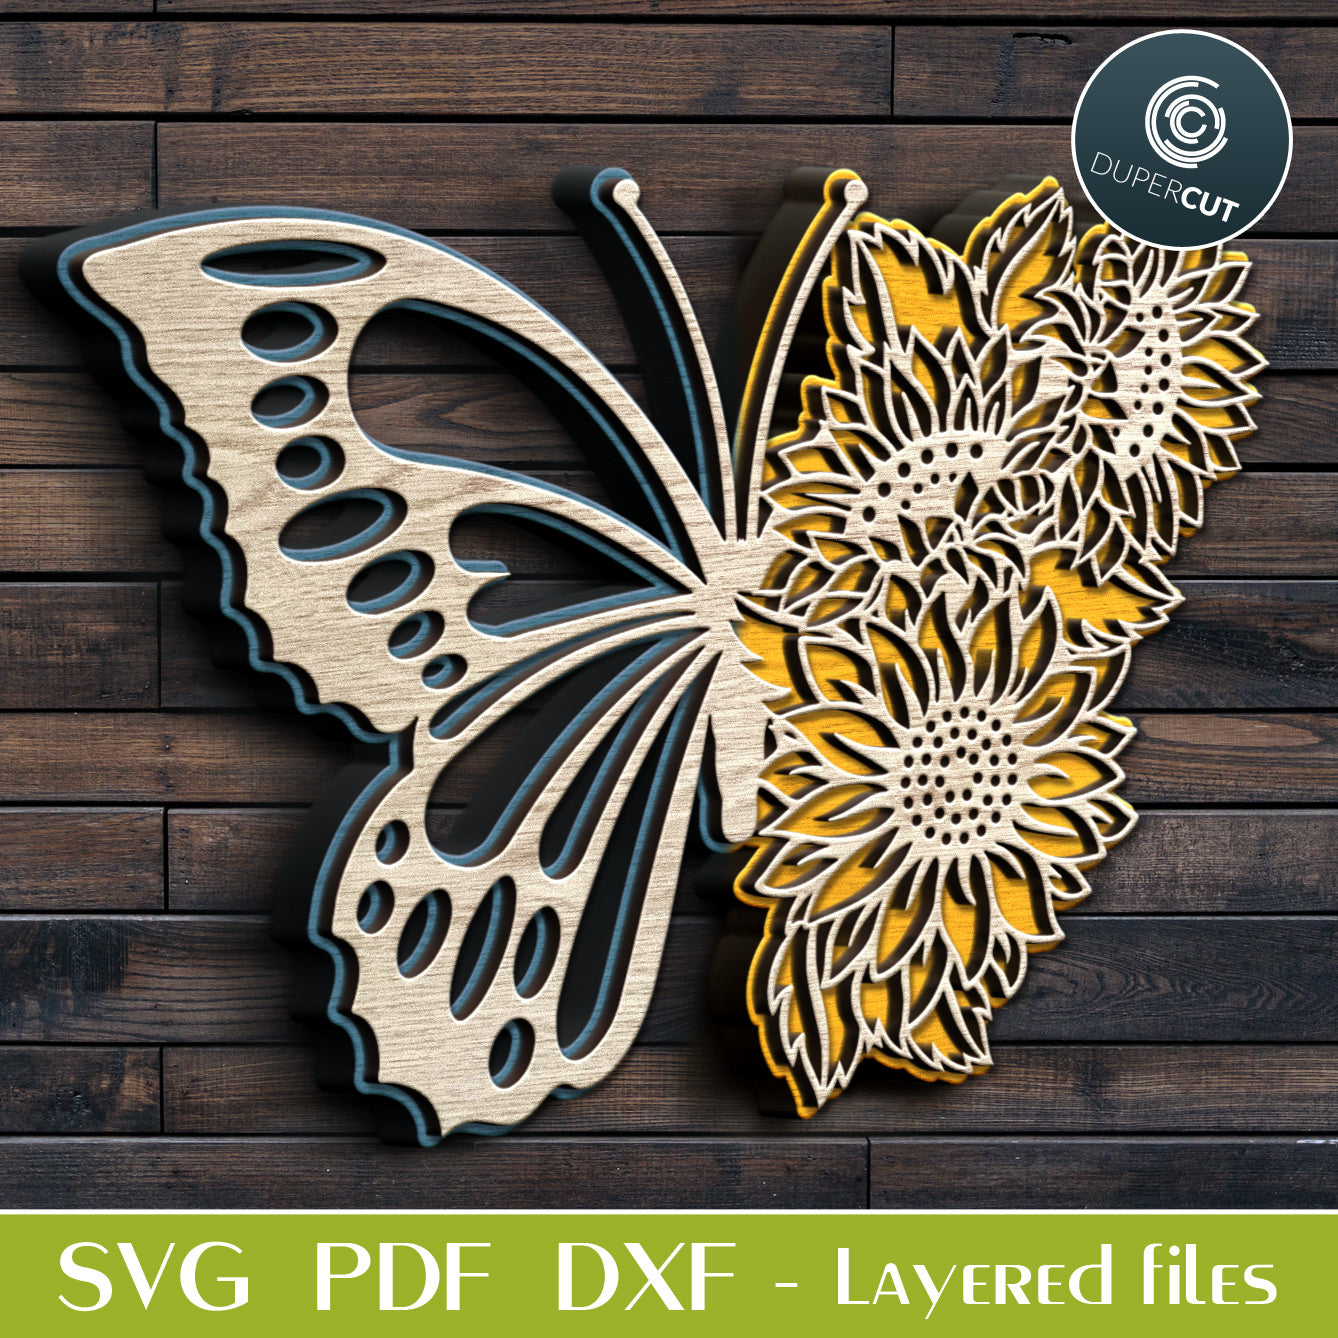 Floral morphing half-butterfly - SVG PDF DXF layered vector files for laser cutting and engraving. For use with Glowforge, Cricut, Silhouette, CNC plasma machines